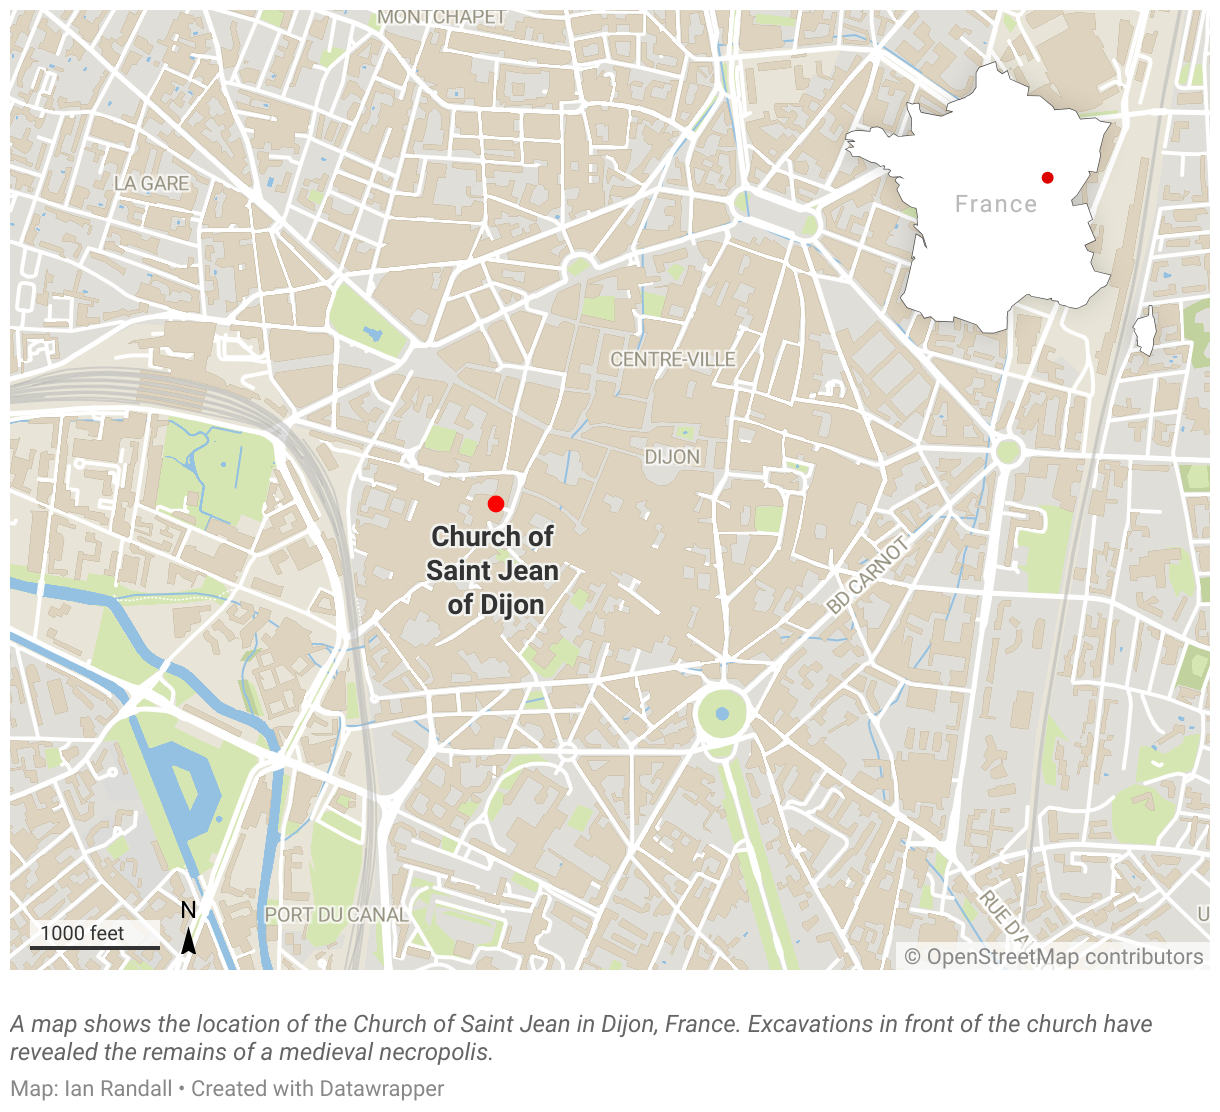 A map shows the location of the Church of Saint Jean in Dijon, France.